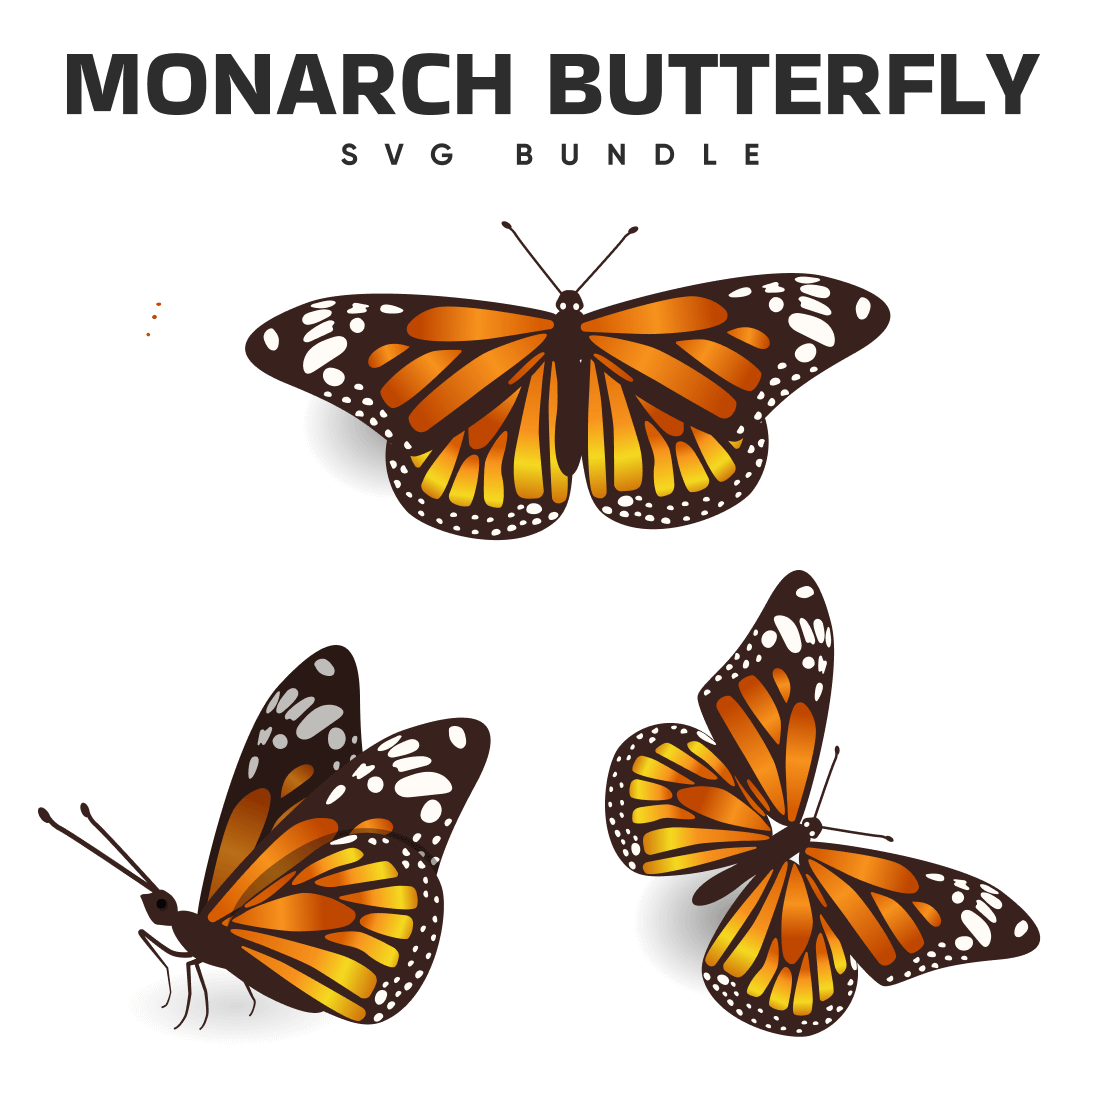 Three monarch butterflies on a white background.